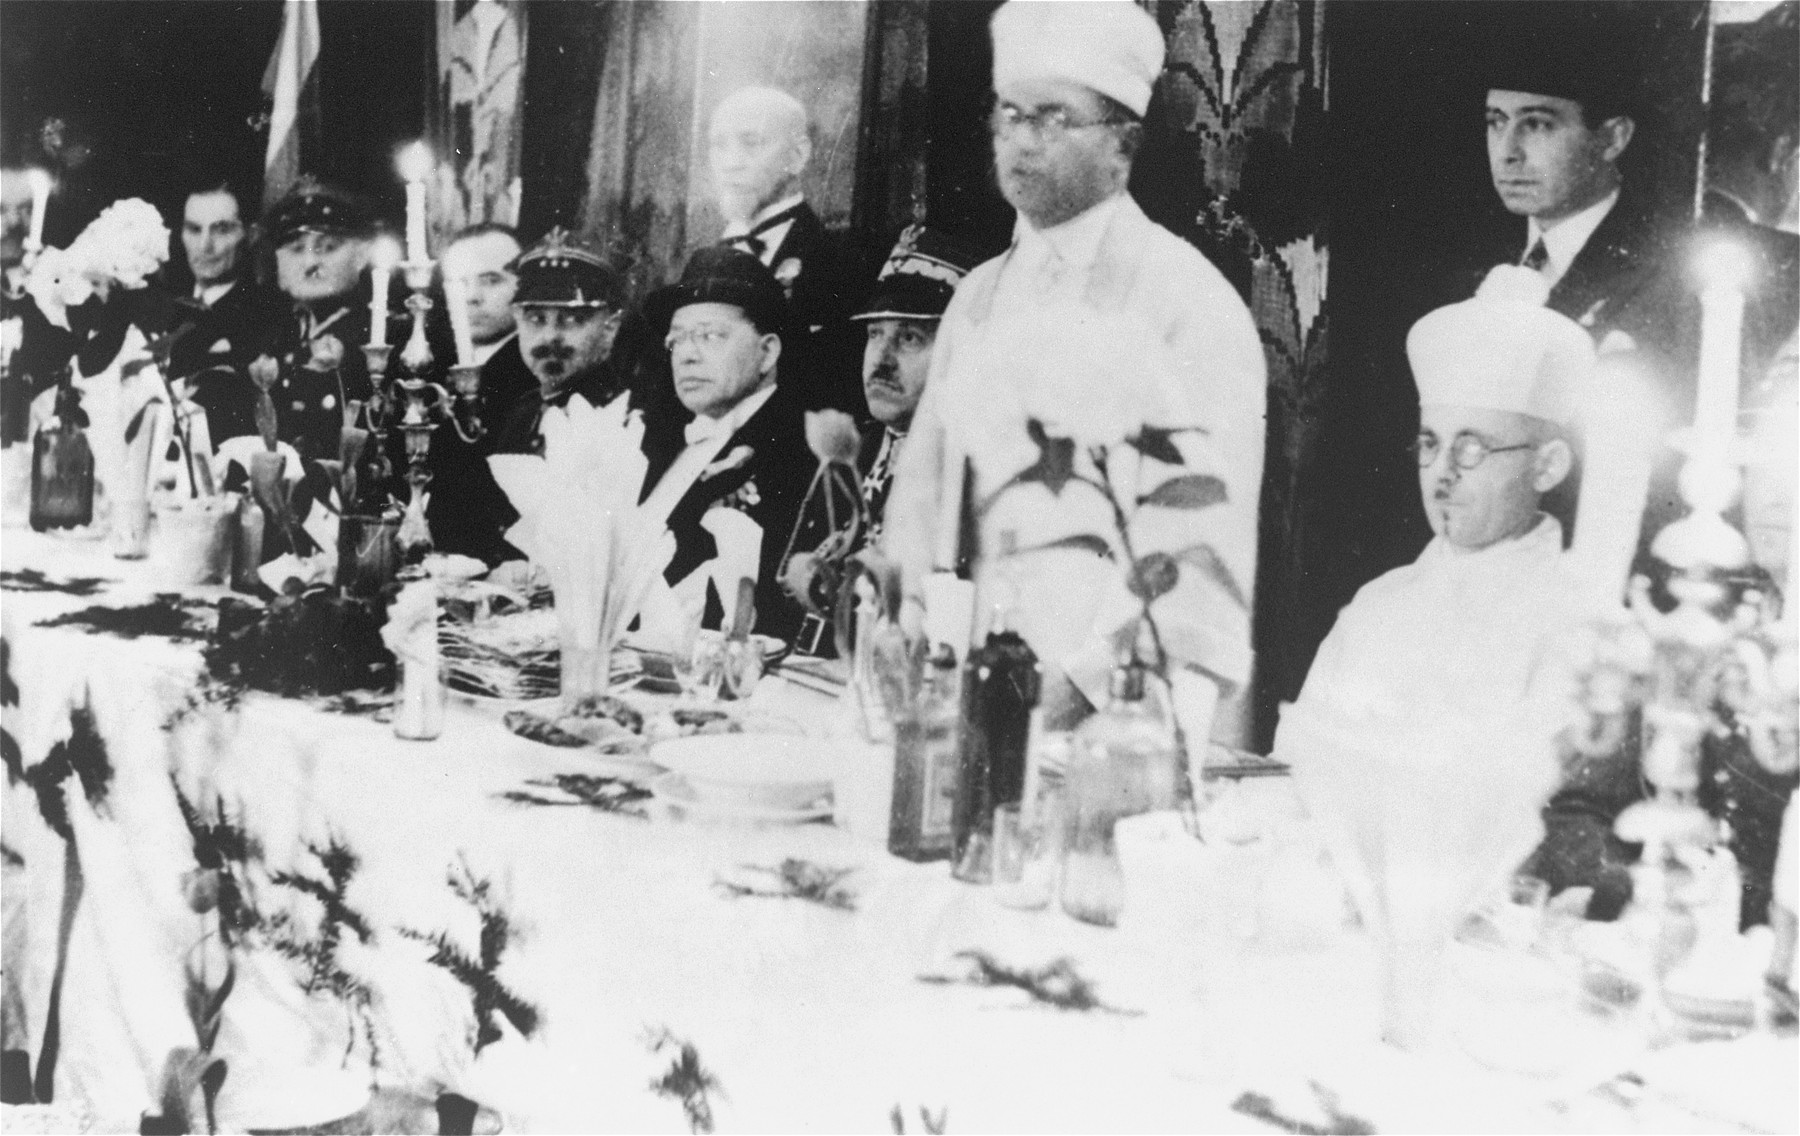 Chief Rabbi of the Polish Army, Boruch Steinberg, leads a Passover seder.

Rabbi Steinberg was later killed in Katyn massacre.